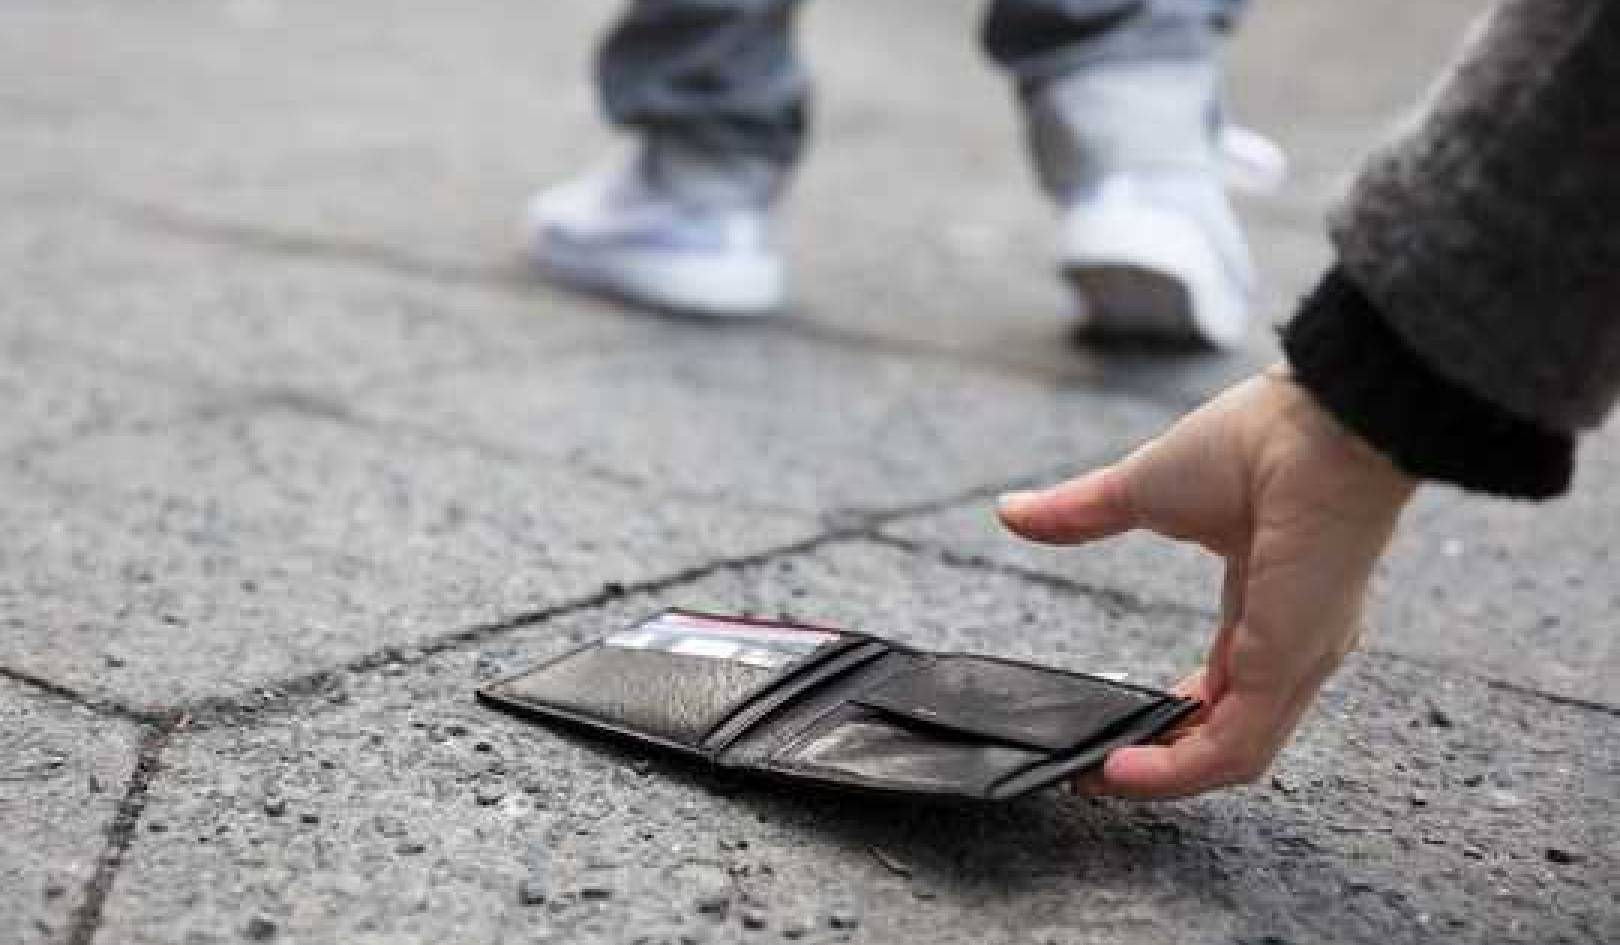 Why The Majority Of People Return Lost Wallets And Which Countries Are The Most Honest